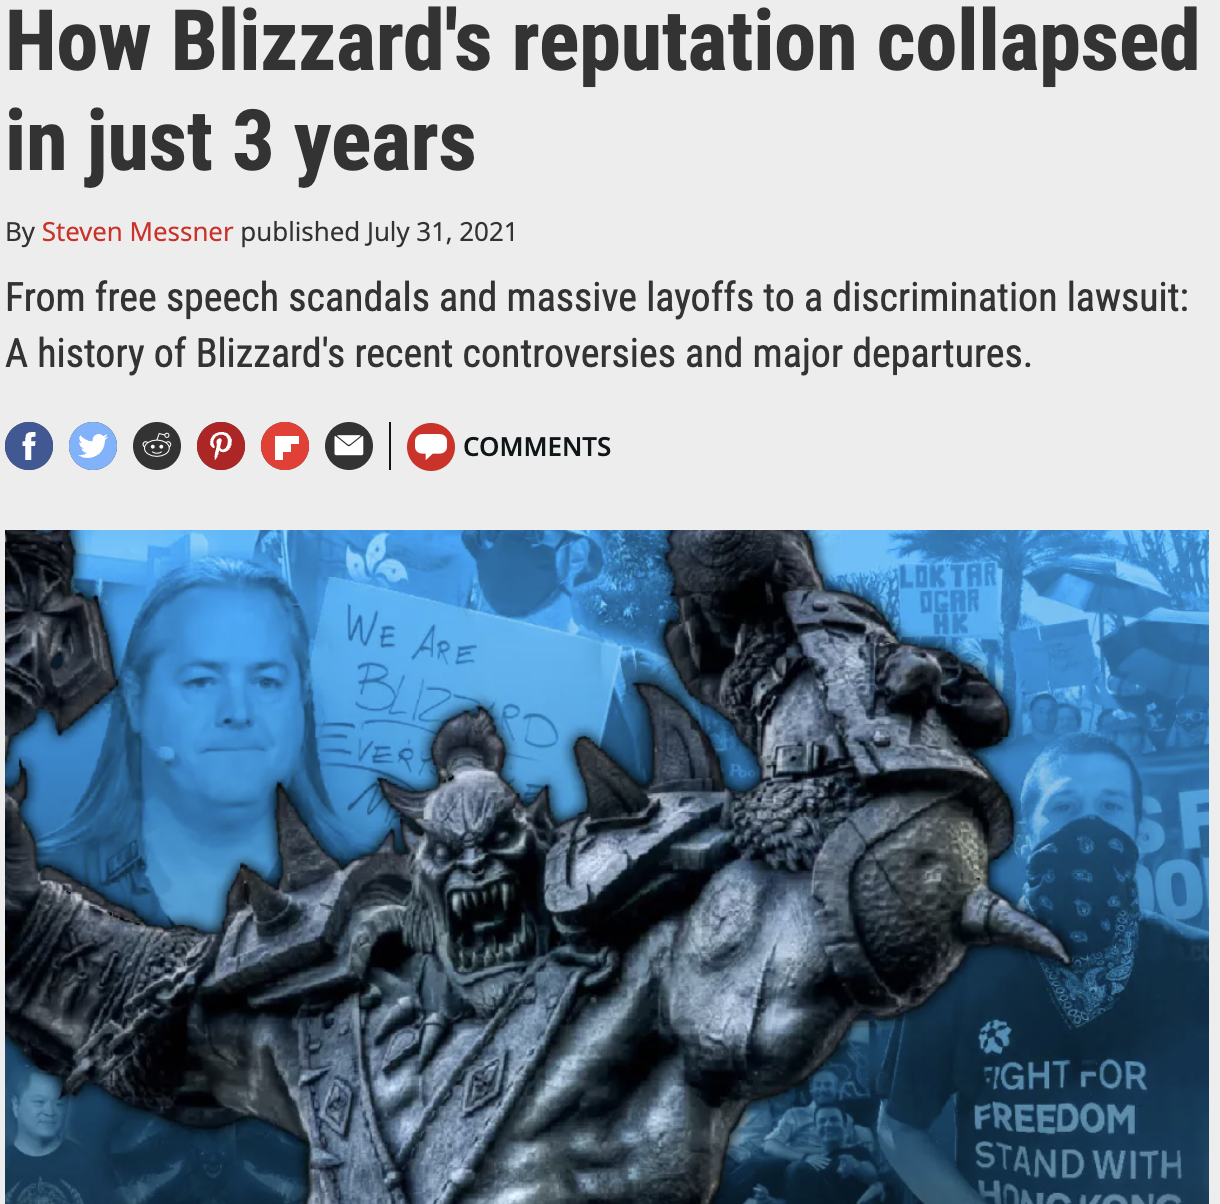 https://www.pcgamer.com/how-blizzards-reputation-collapsed-in-just-3-years/